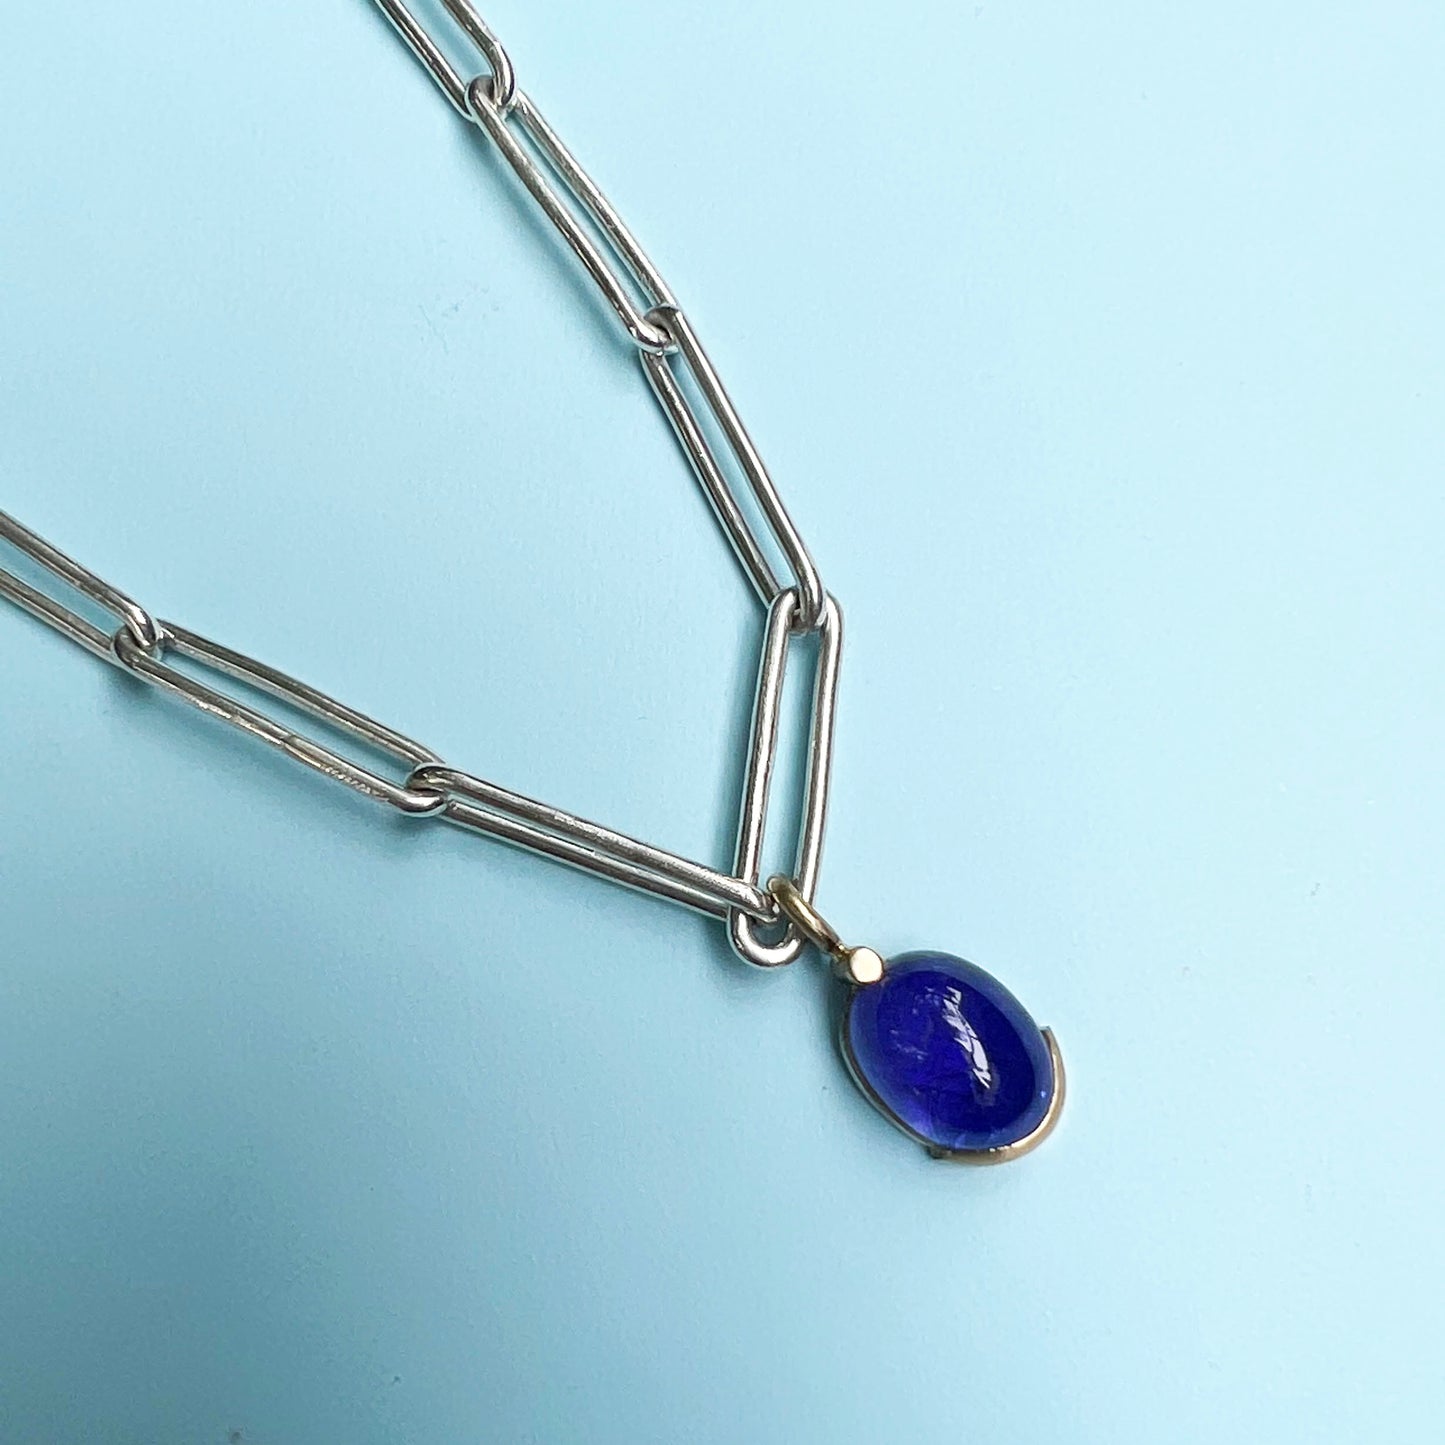 unique jewellery, handmade jewellery, 18ct gold & tanzanite necklace, 18ct gold necklace, sterling silver chain, tanzanite pendant, tanzanite necklace, gemstone necklace, paperclip chain